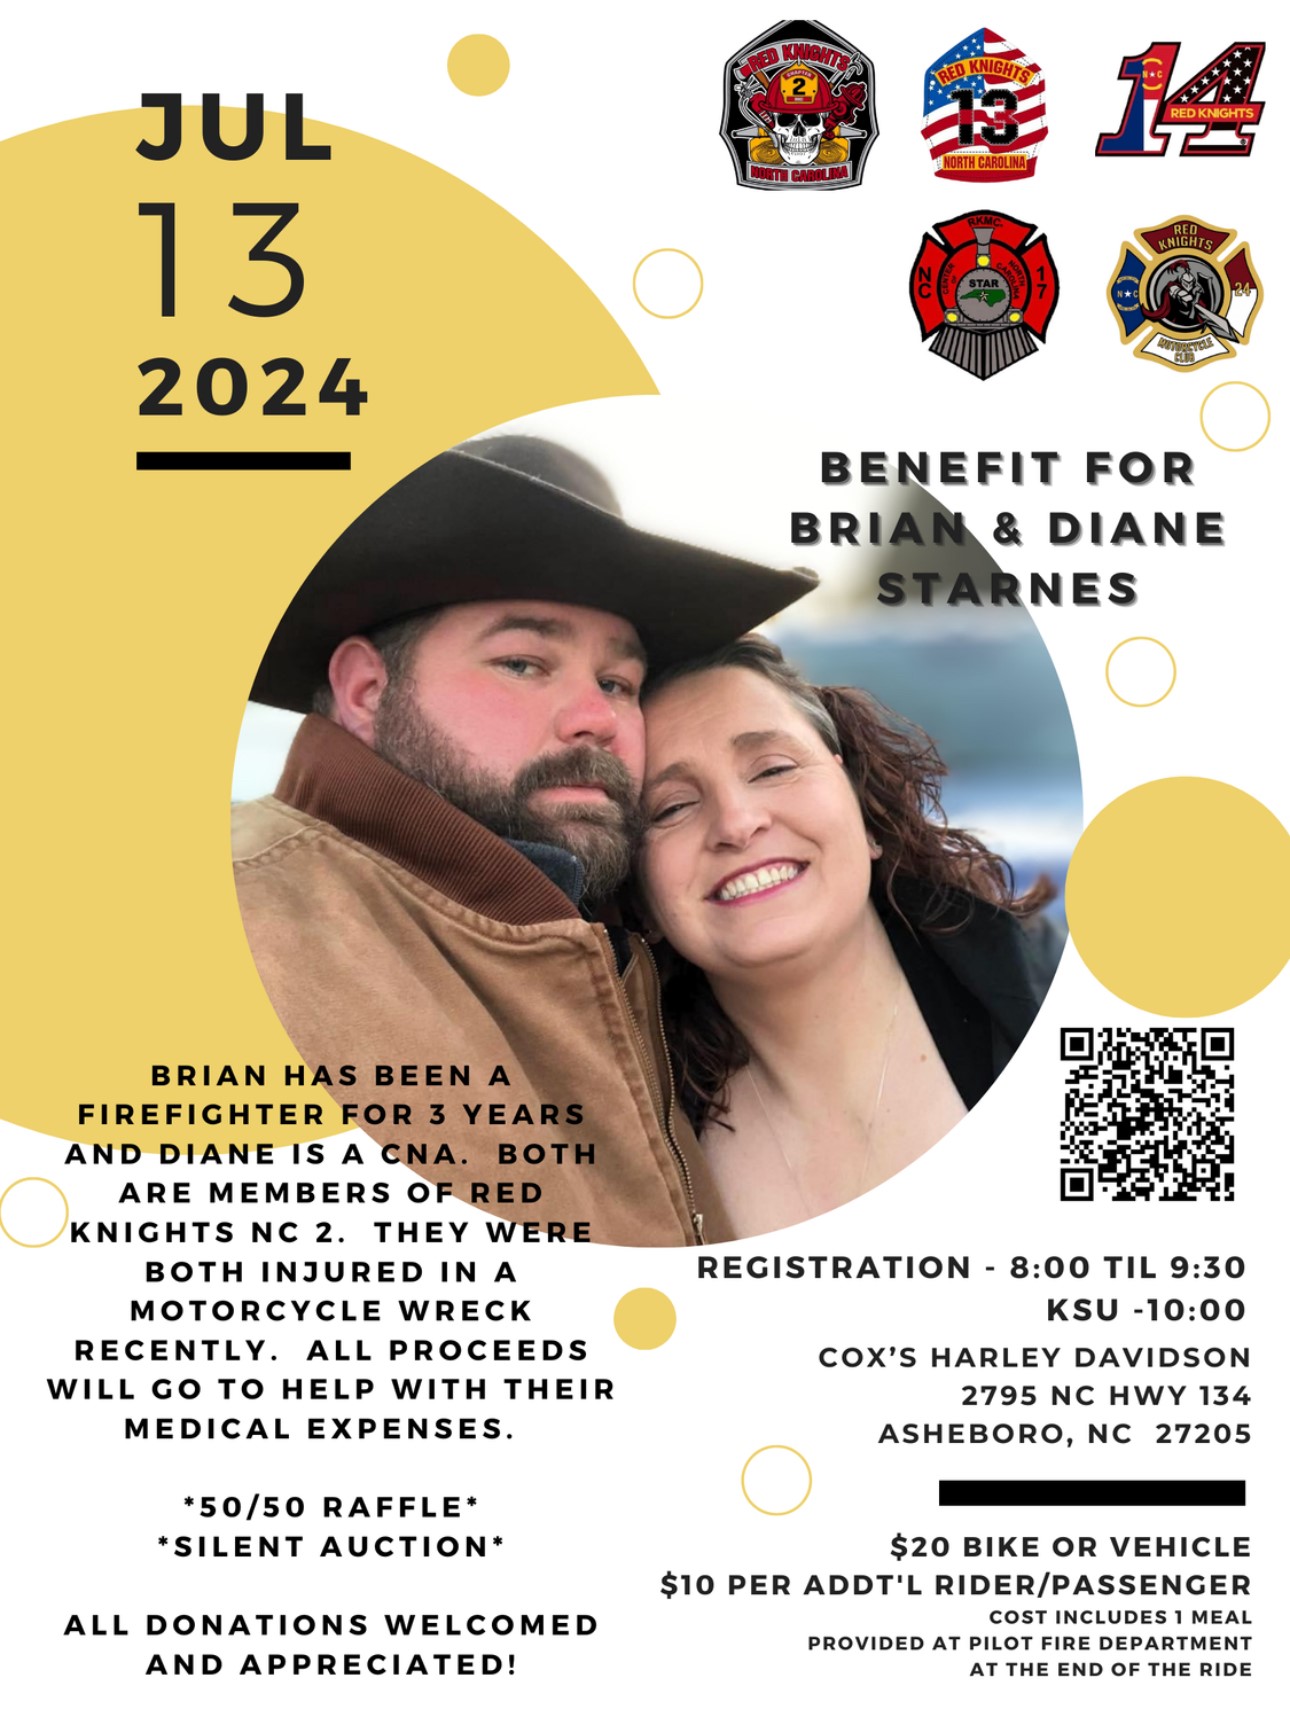 Red Knight Benefit Ride | Brian and Diane Starnes